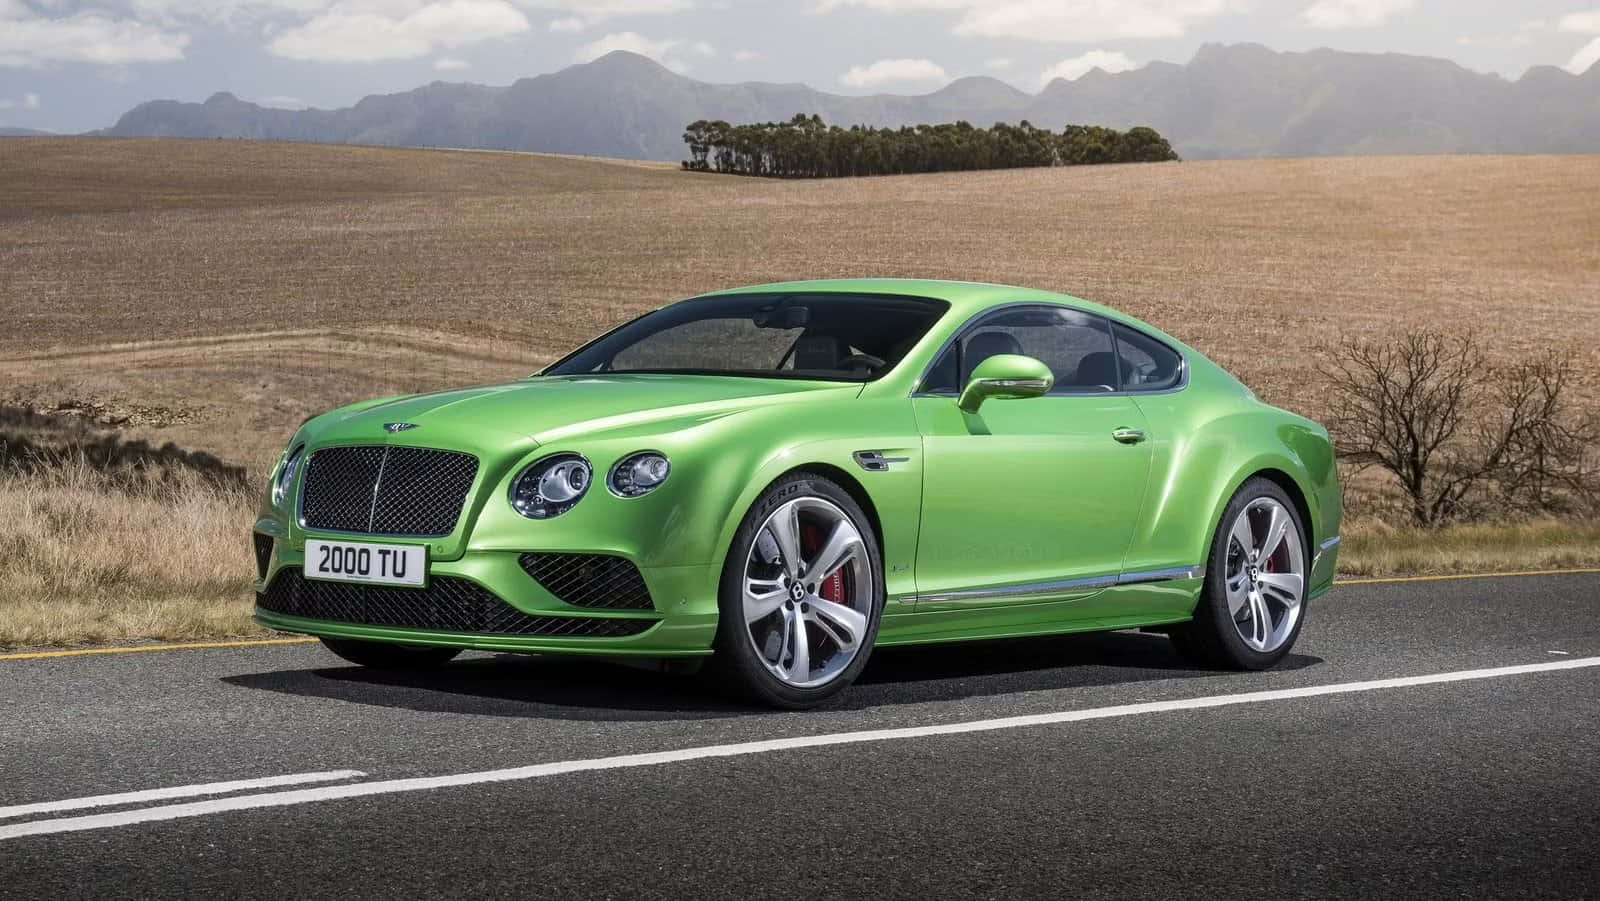 Get Ready to Drive in Luxury with a Bentley